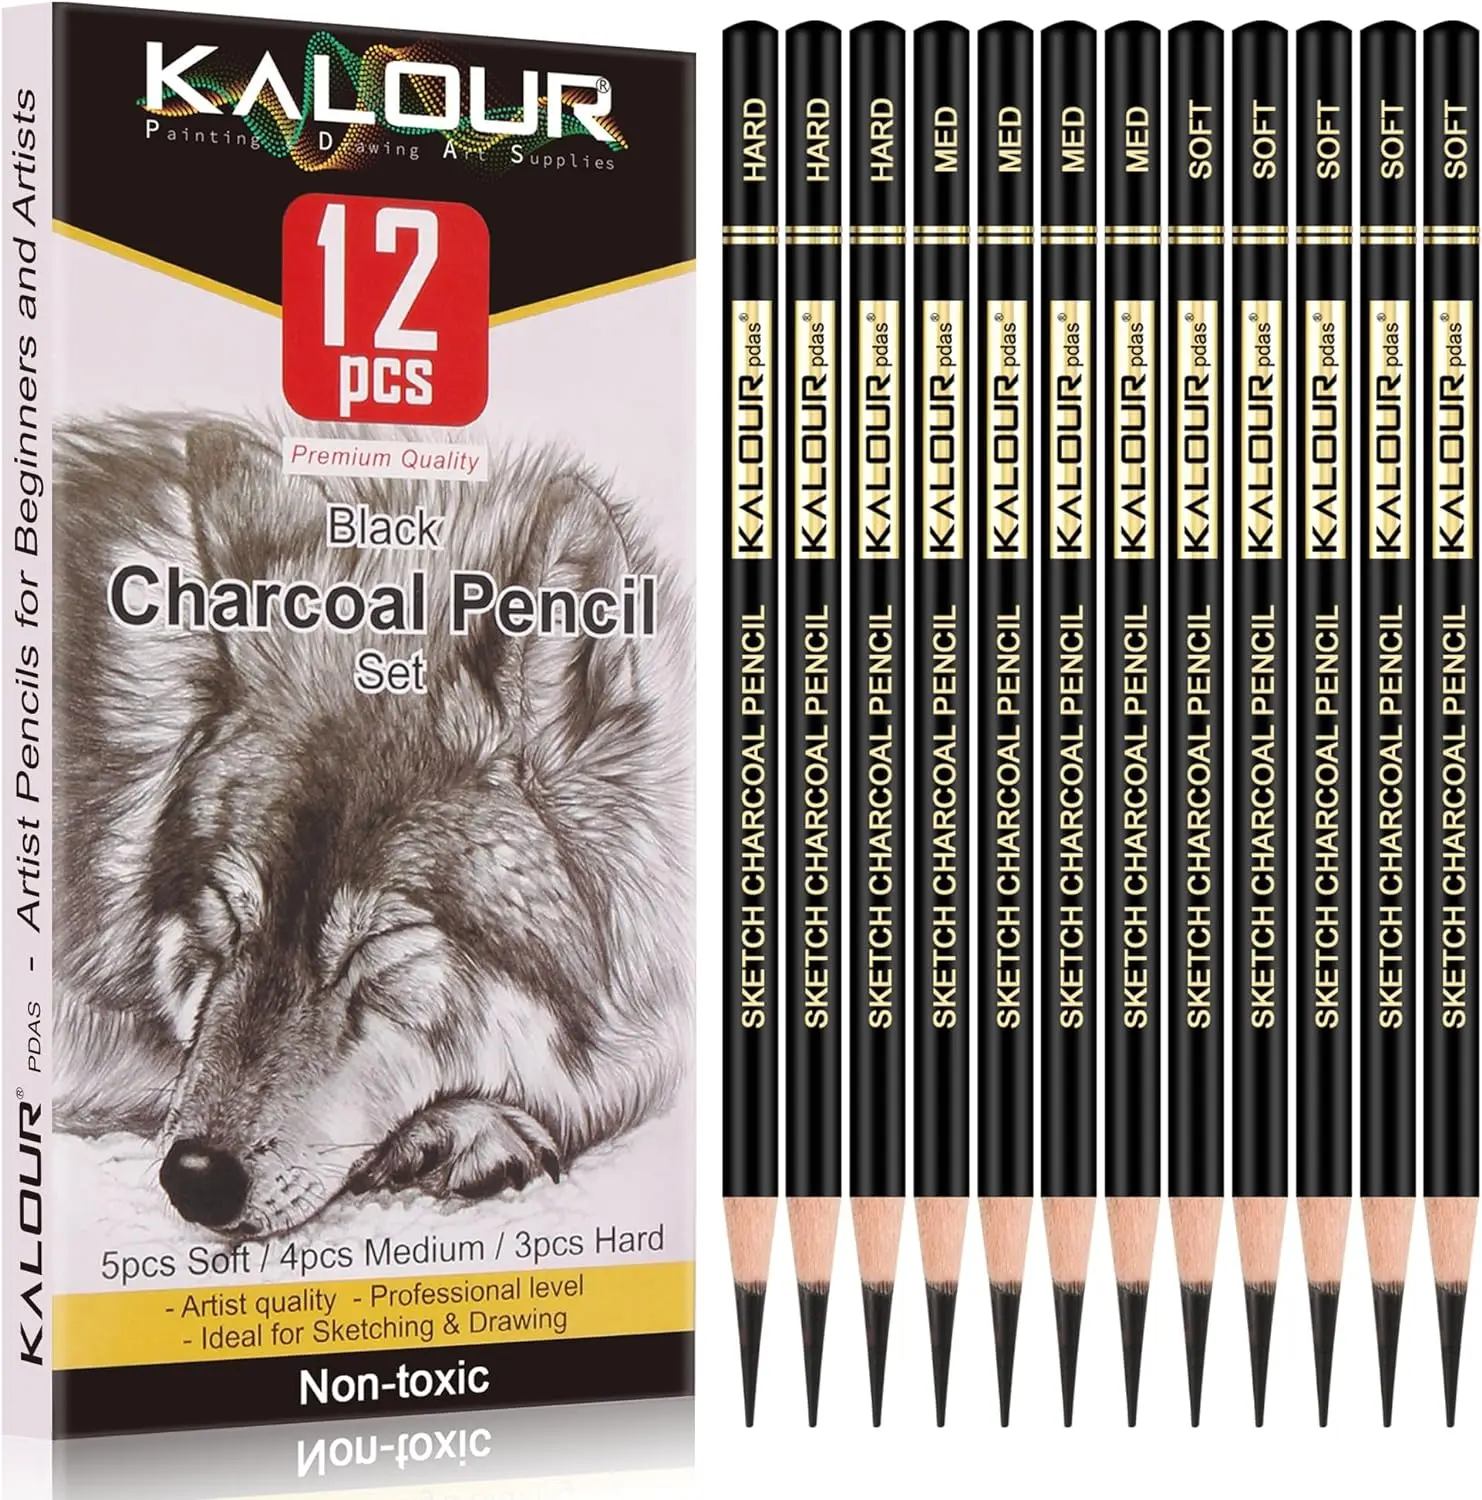 Professional Charcoal Pencils Drawing Set -12 Pieces Soft, Medium and Hard Charcoal Pencils for Drawing, Sketching, Shading, Art practical vine charcoal sticks medium sketching pencil smooth writing for painter drawing writing shading blending 25pc